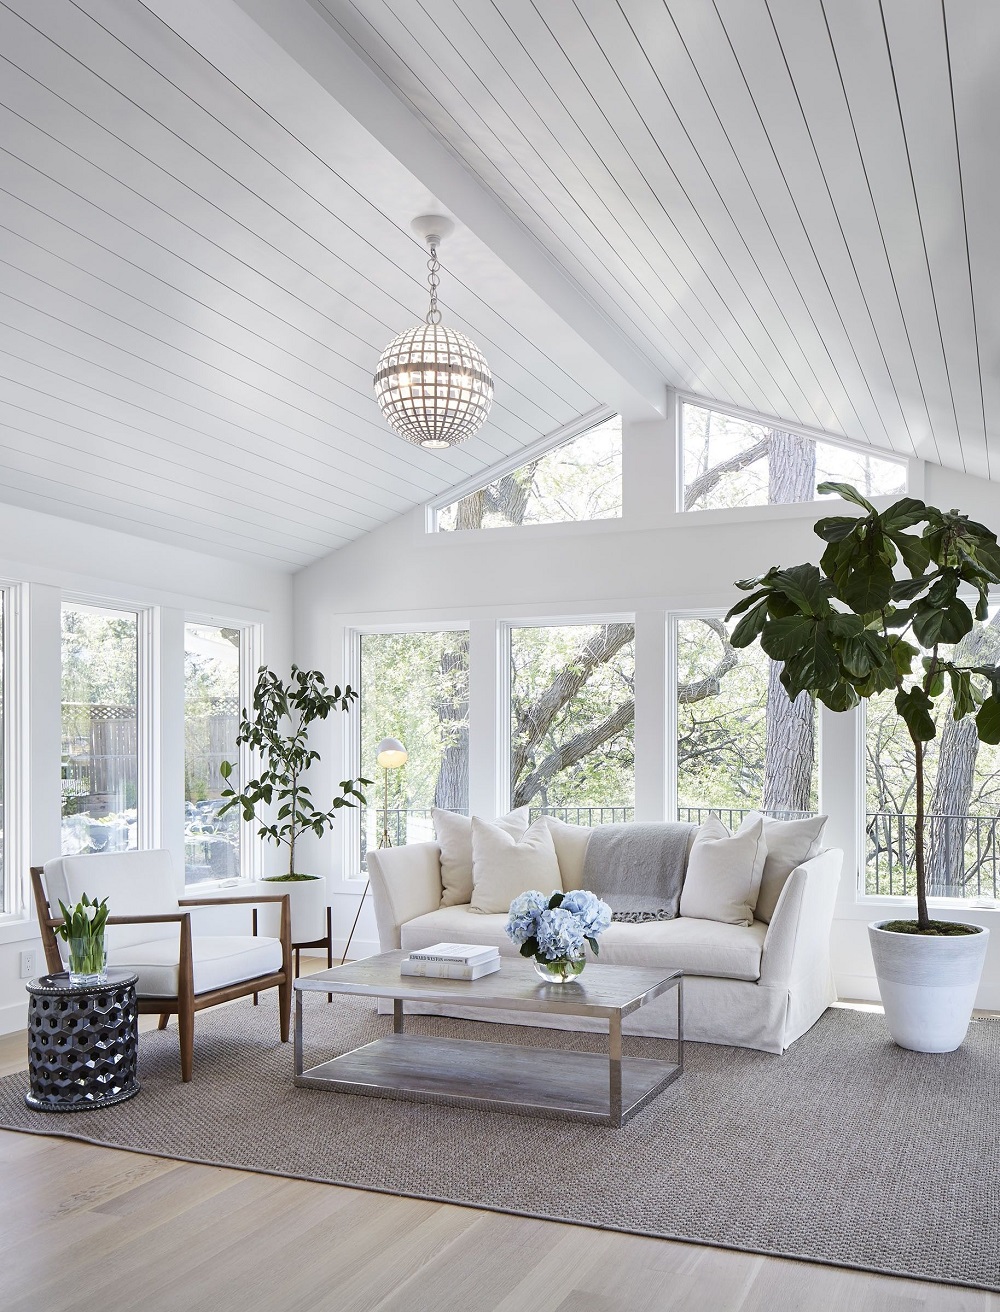 sr2 Cool porch and sunroom ideas to try in your home